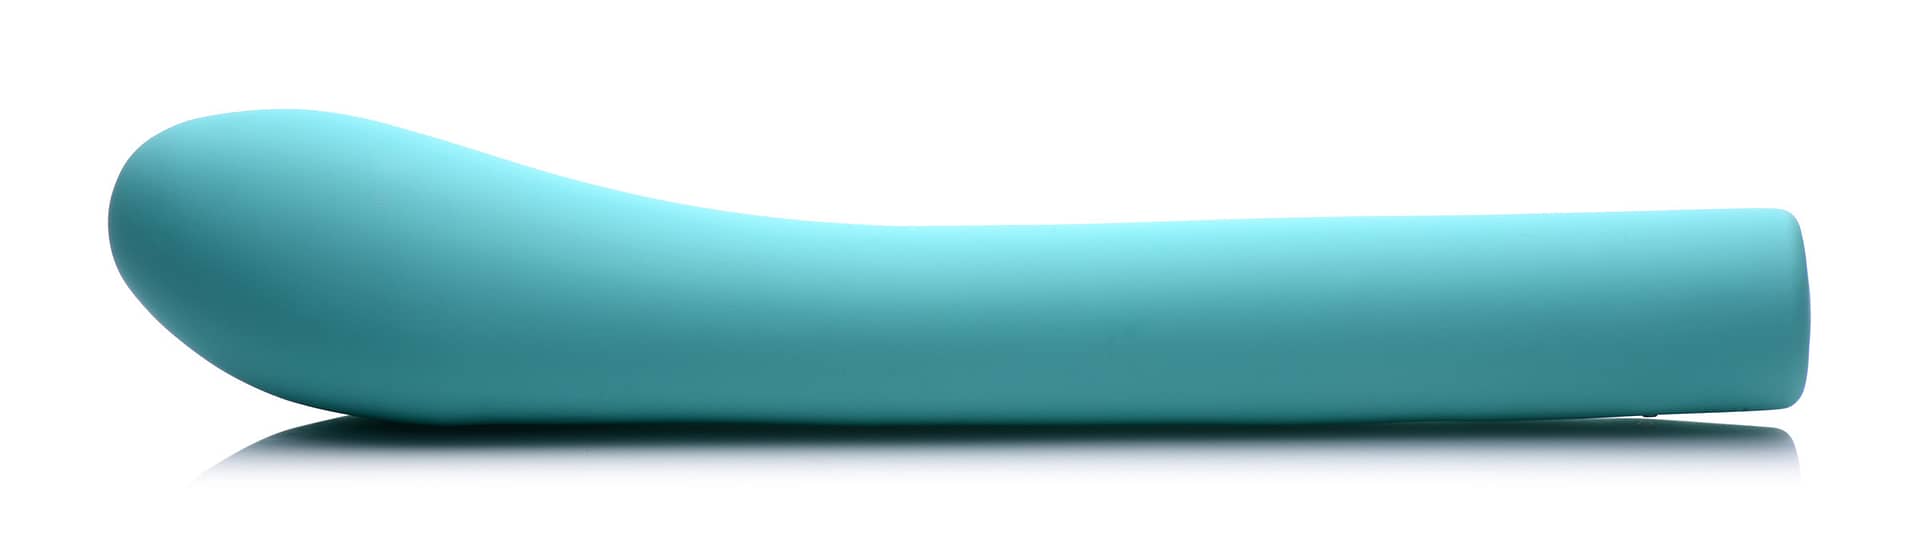 5 Star 9x Come Hither G Spot Silicone Vibrator Teal The Bdsm Toy Shop